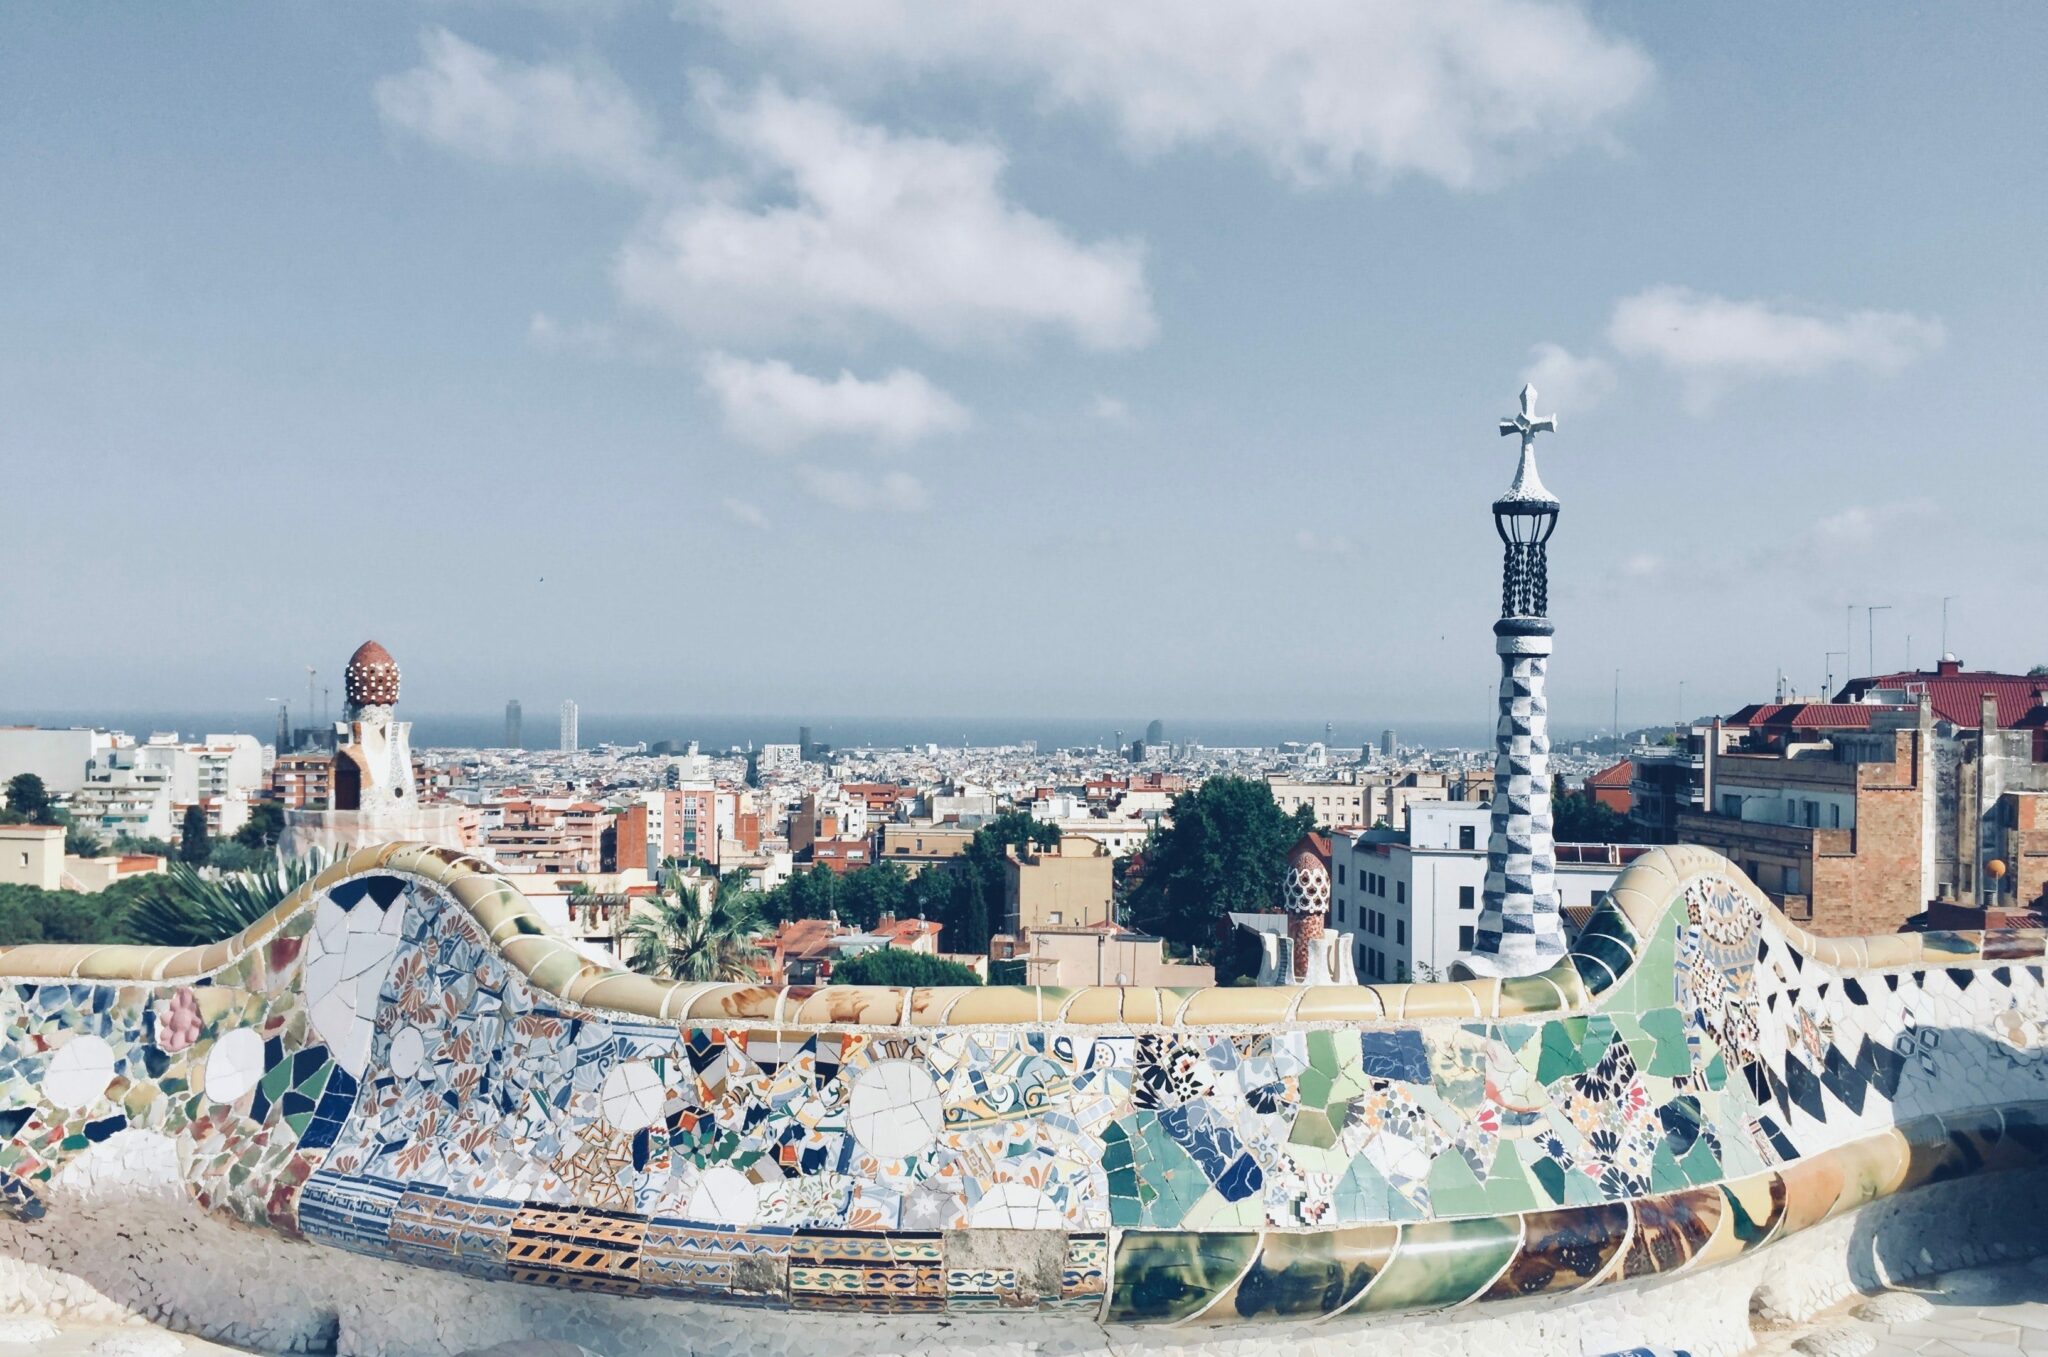 Park Guell in Barcelona and view overlooking the city